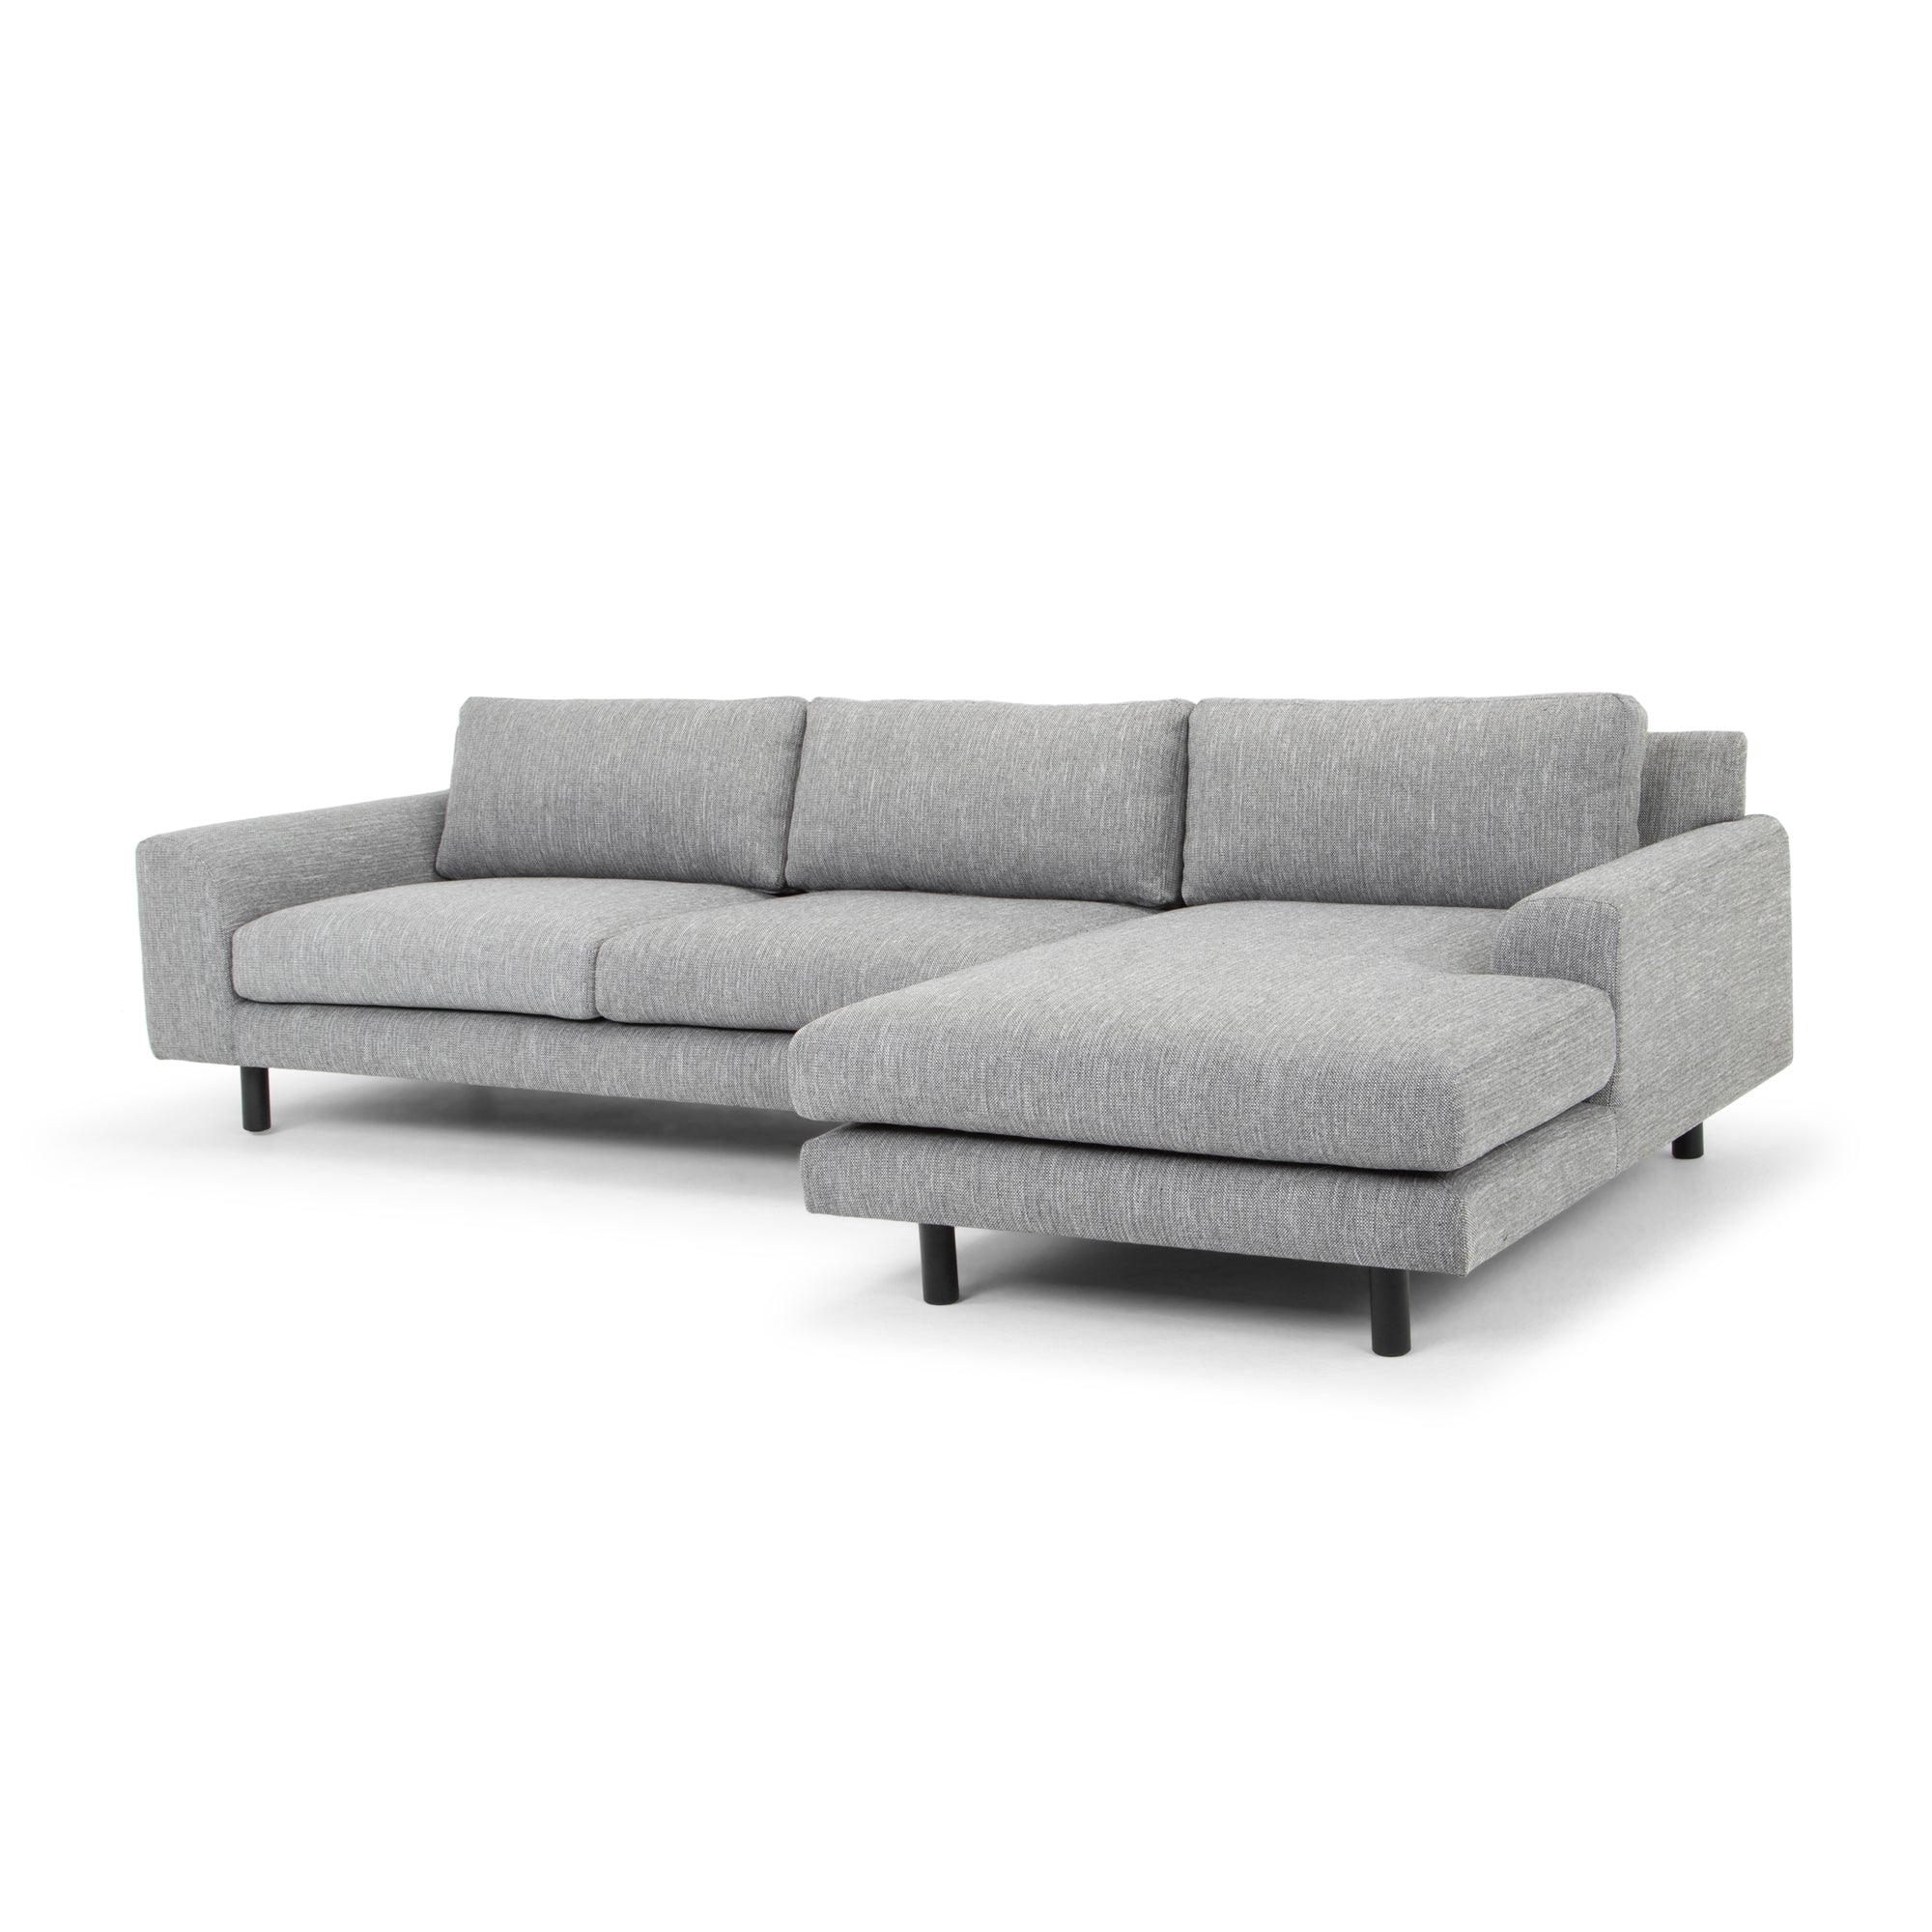 Jacob 3 Seater Left Chaise Sofa - Graphite Grey with Black Legs-0